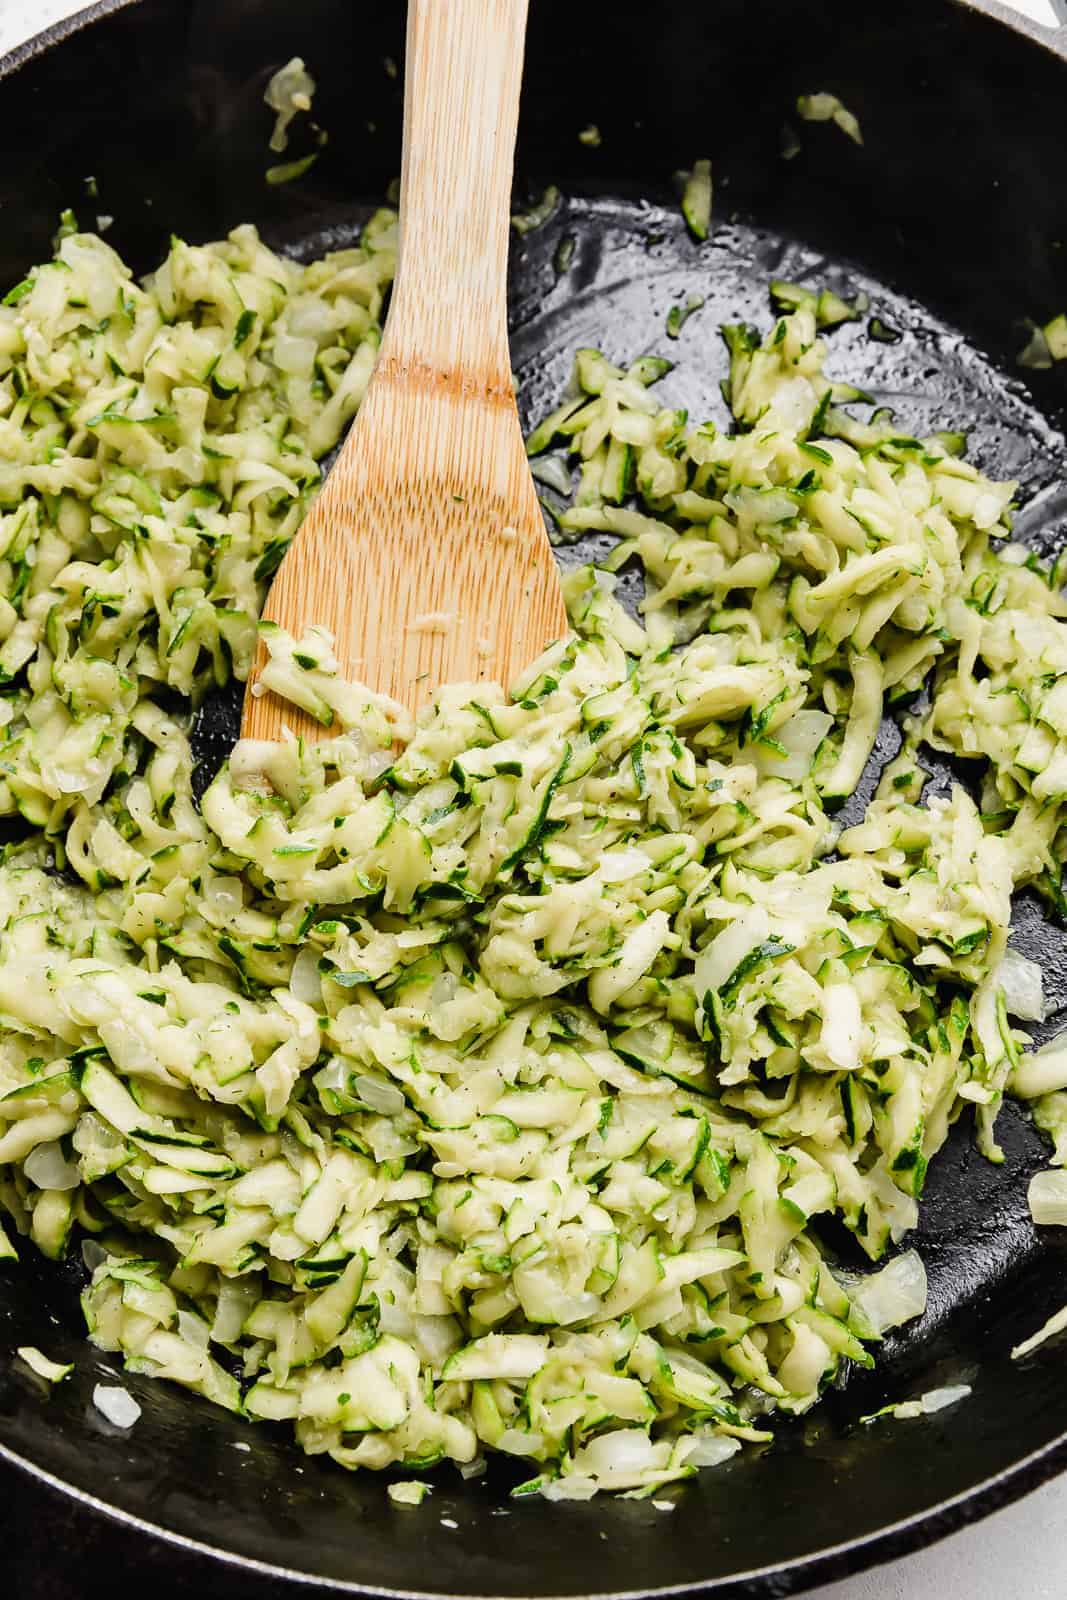 Cooked down shredded zucchini to make a zucchini sauce for pasta.